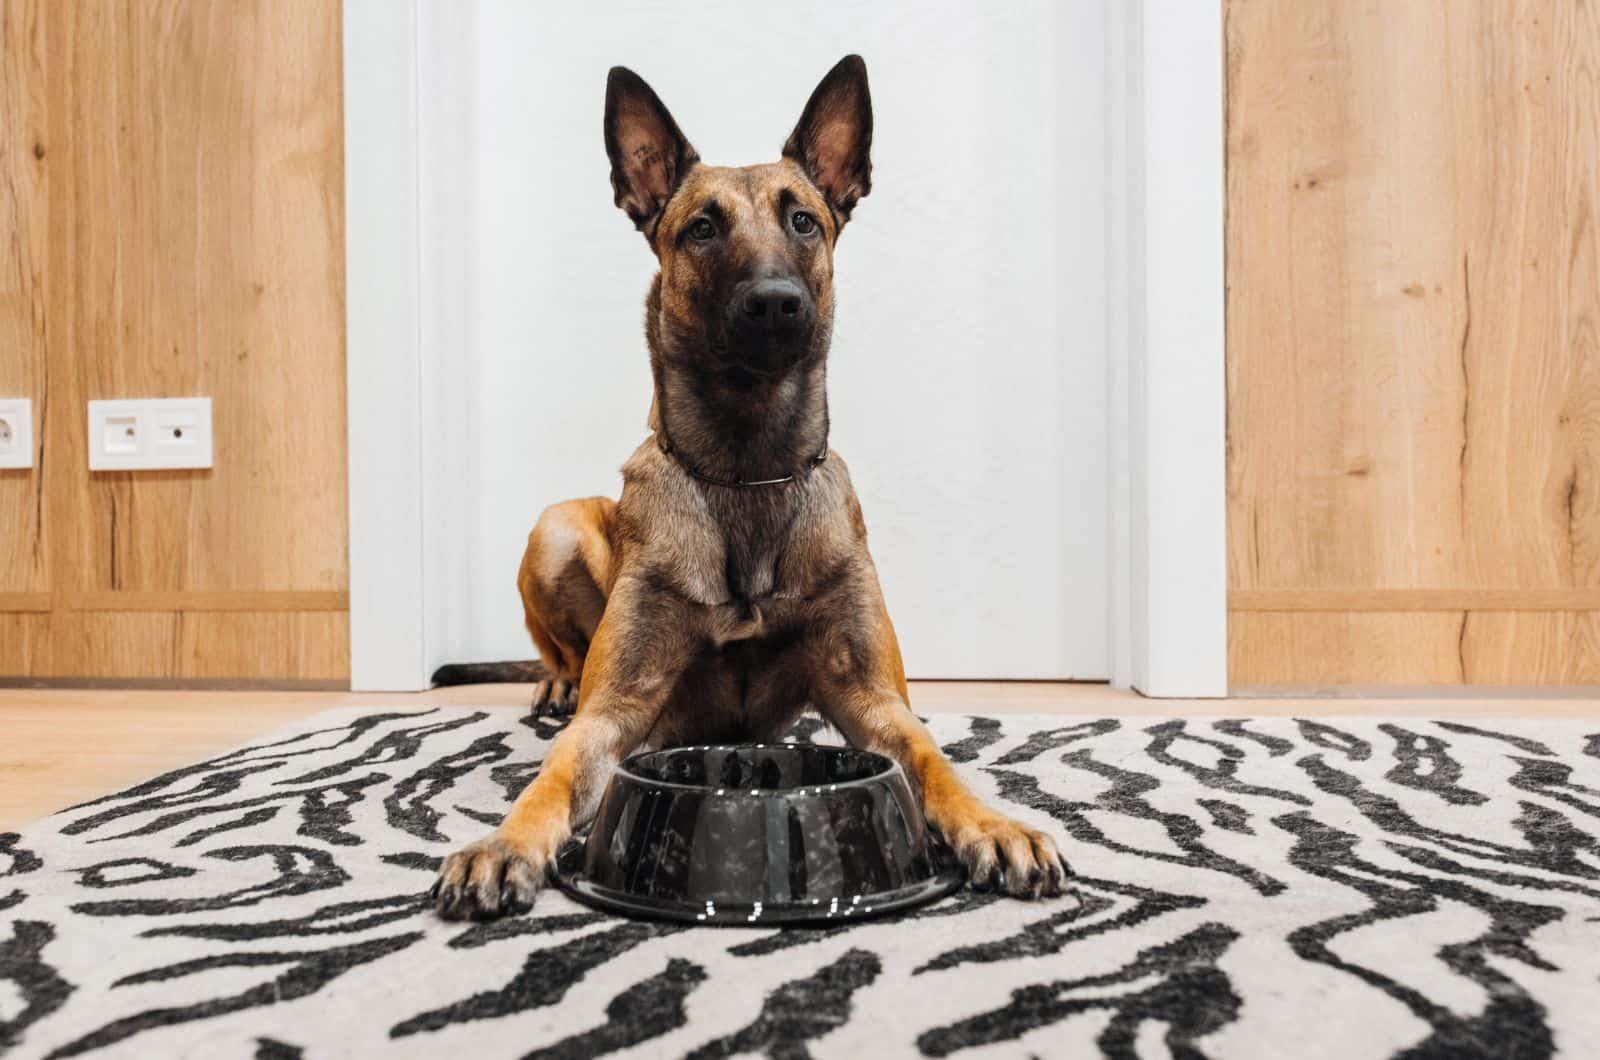 Belgian Malinois sitting on floor by his bowl